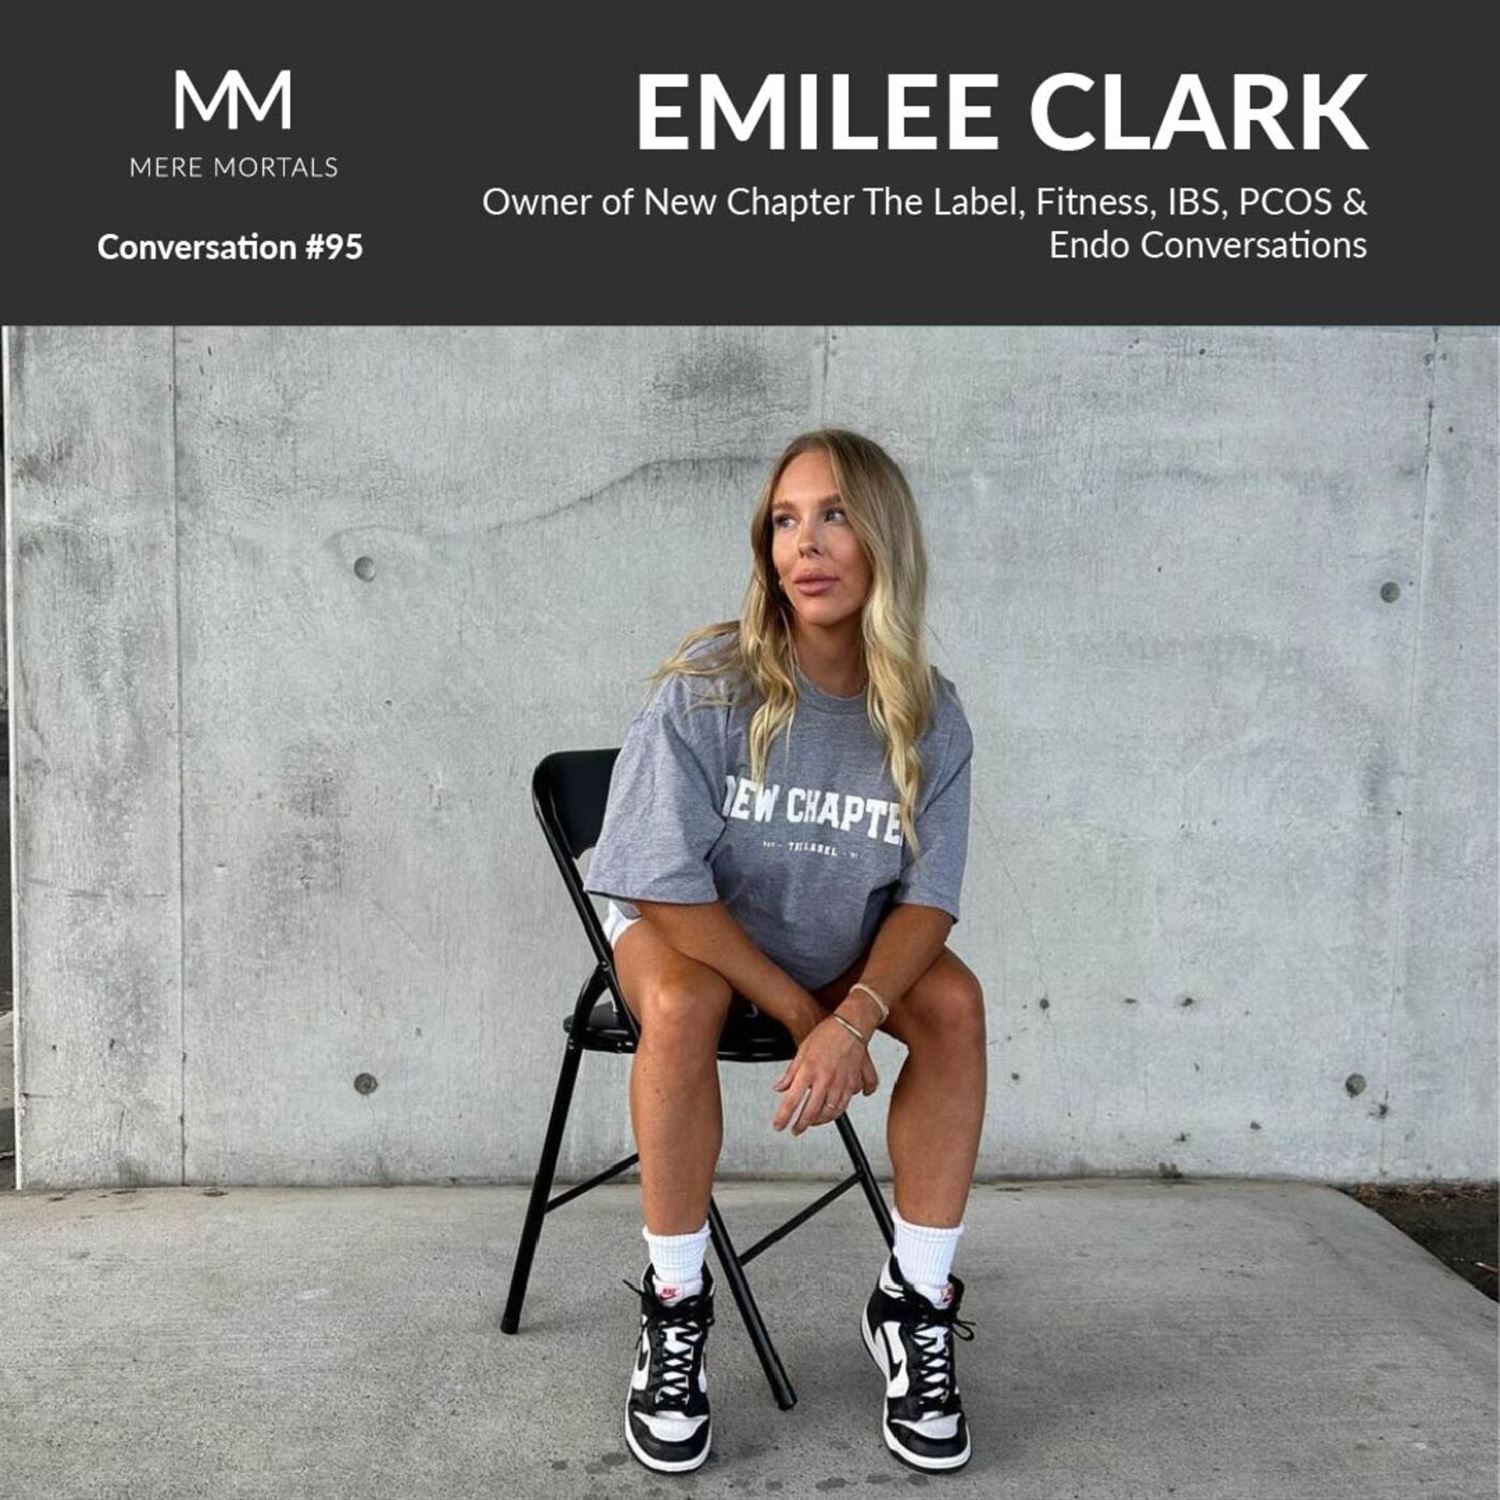 EMILEE CLARK | New Chapters, Fitness, Apparel, IBS, PCOS & ENDO